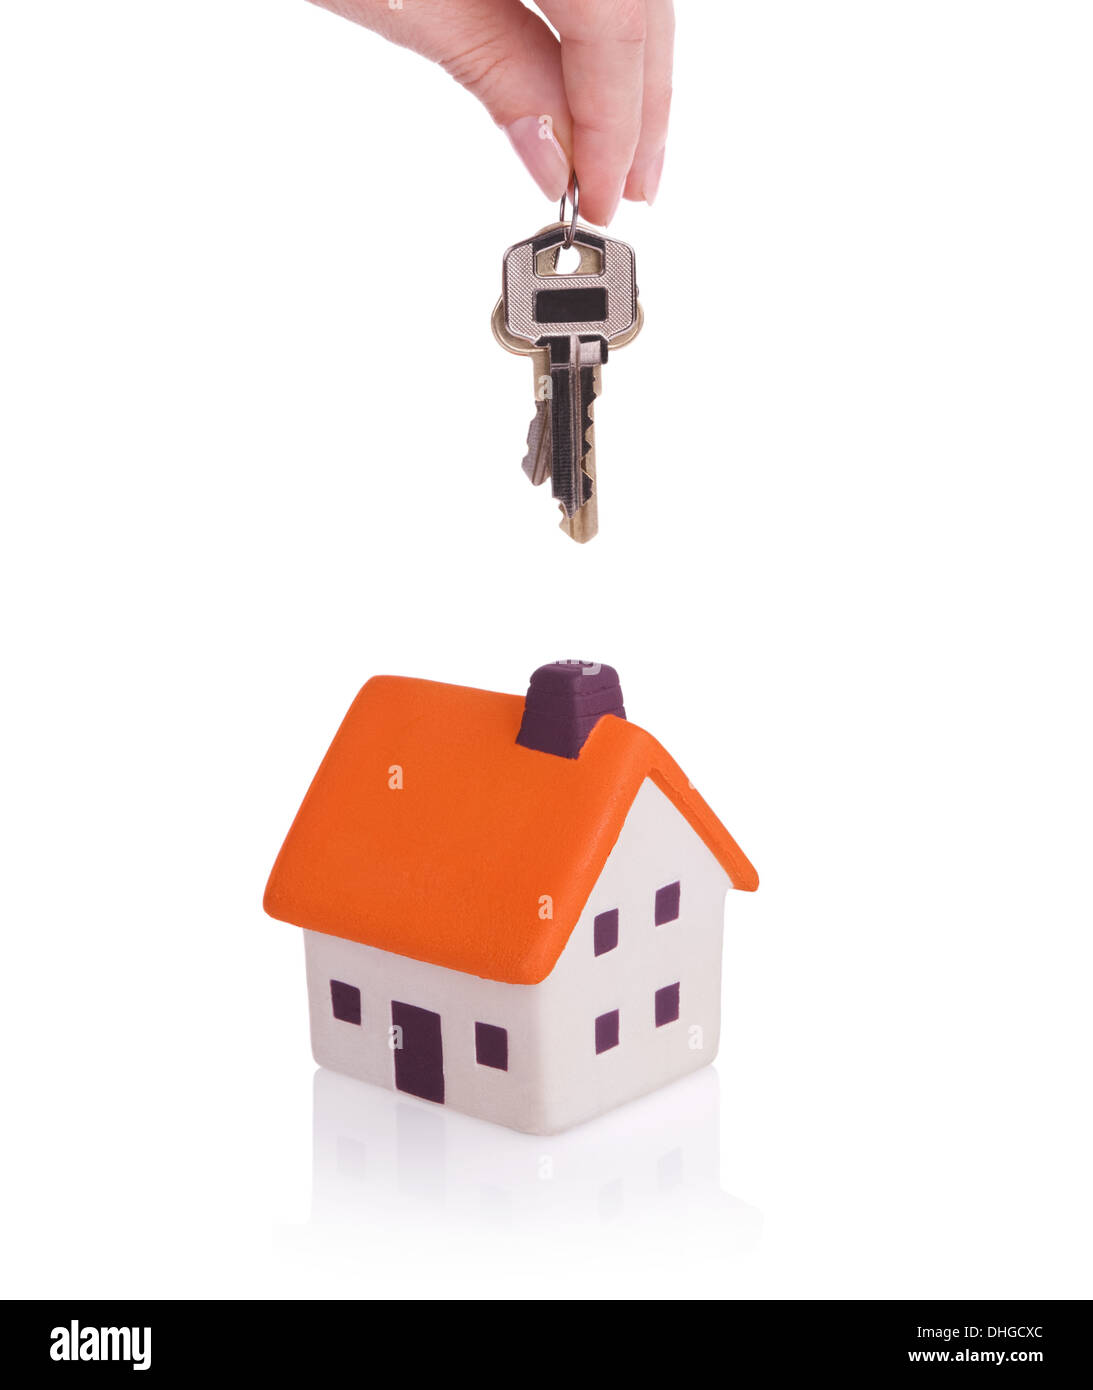 Conceptual image with small house and keys.Isolated on white Stock Photo